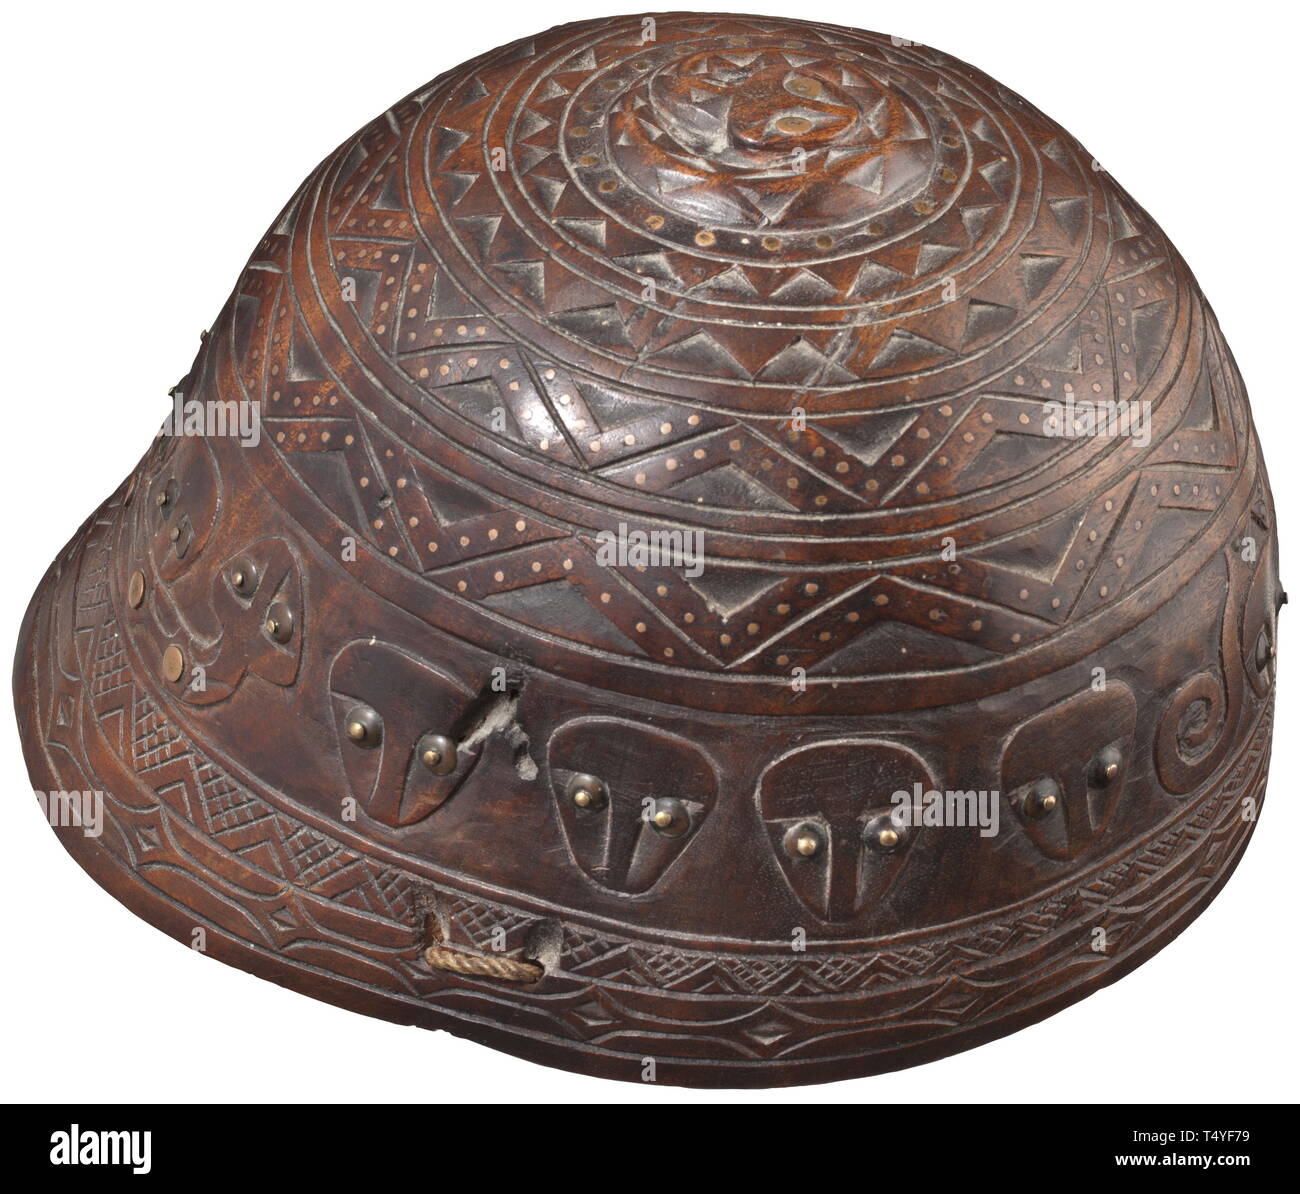 A carved wooden helmet, Chinese/Taiwanese, 19th century. One-piece helmet made from hardwood. The outside completely carved with stylised faces, geometrical decorations as well as a snake on the crown plate. Several continuous rows of inlaid copper and brass pins, some of them underlaid with horn discs. Two braided chin straps attached to the helmet. Diameter 20 cm. ++ historic, historical, China, Chinese, 19th century, Additional-Rights-Clearance-Info-Not-Available Stock Photo